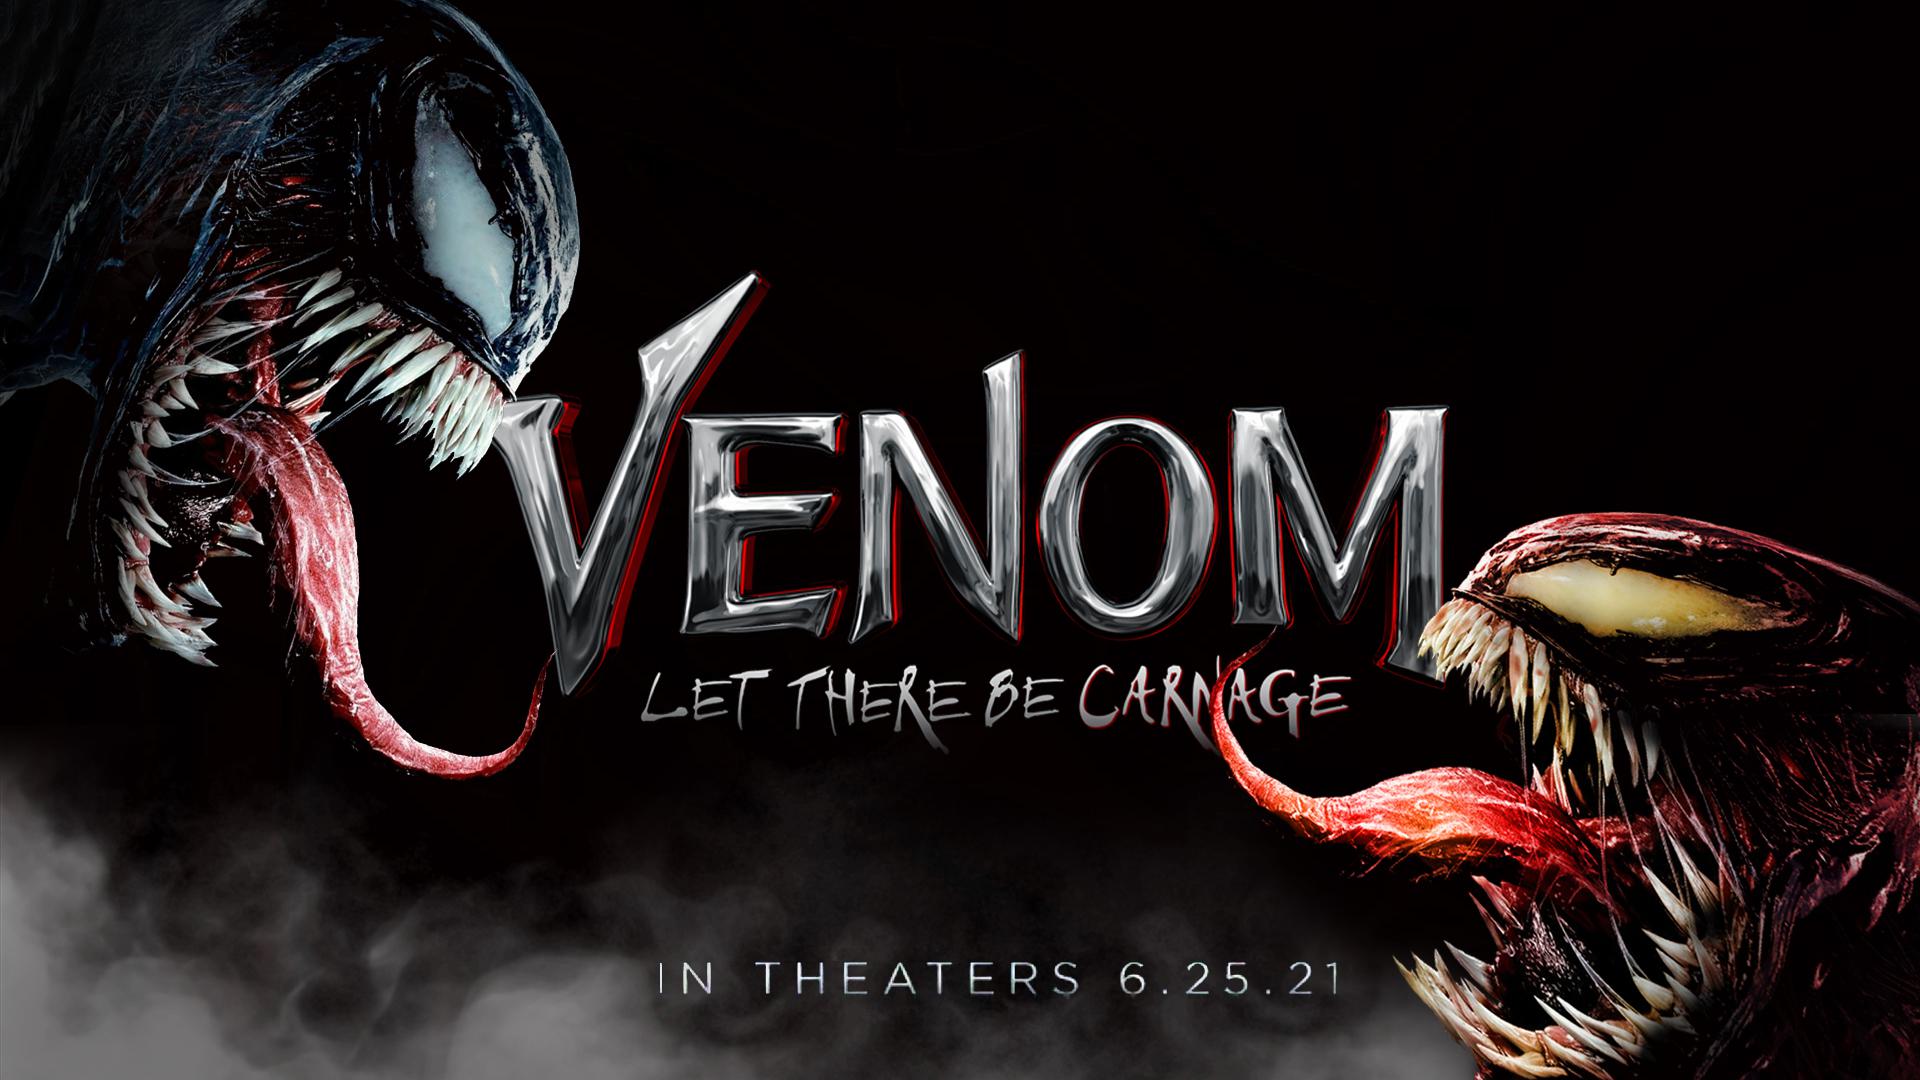 Venom: Let There Be Carnage Poster By Me : Spiderman